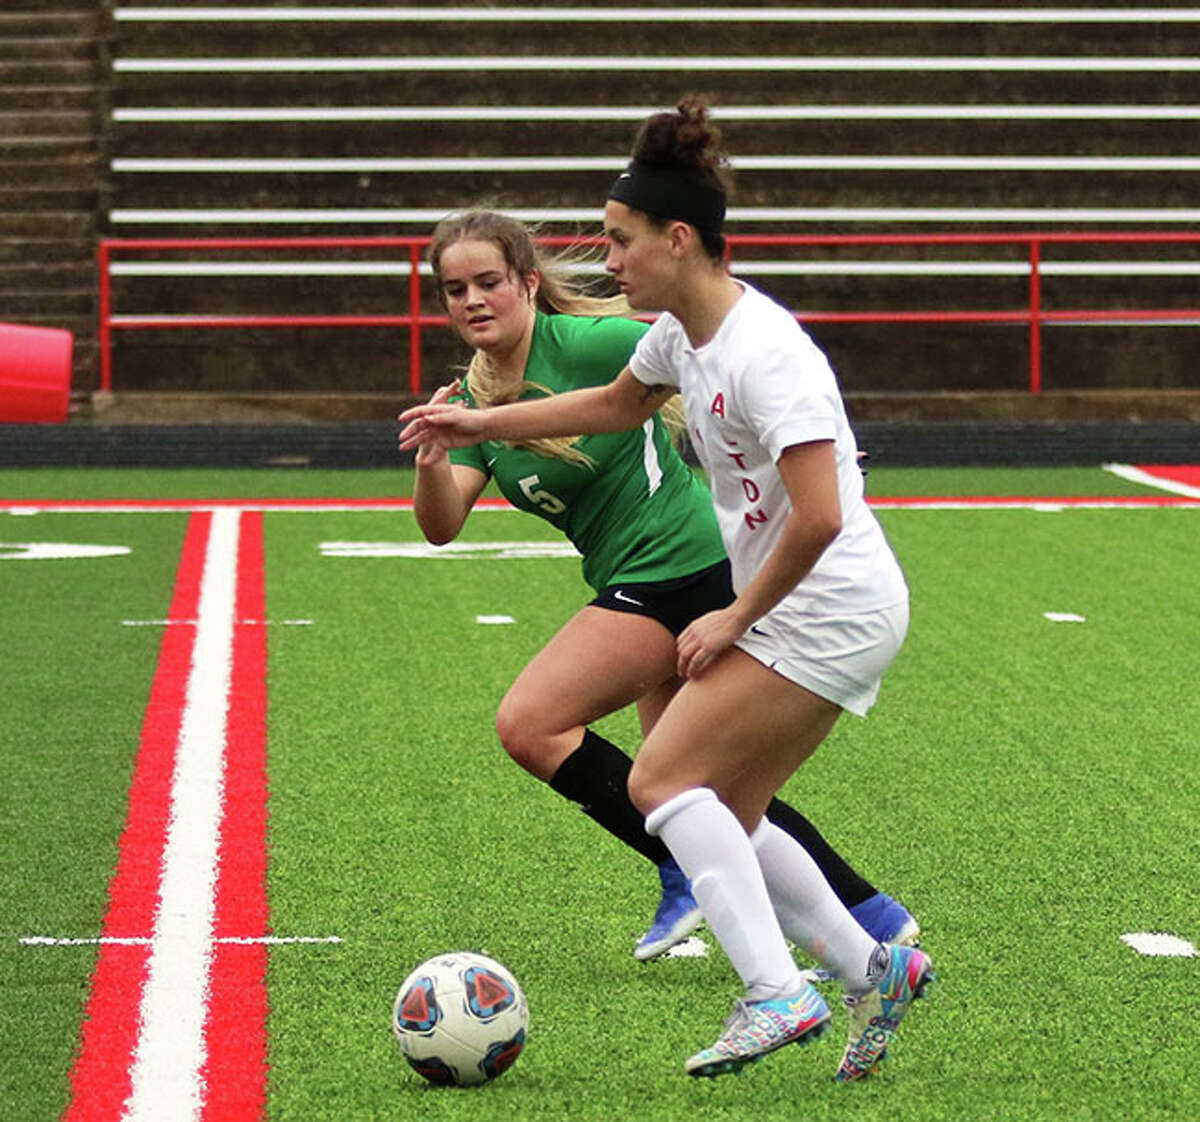 Alton's Emily Baker (left) pushes the ball toward the goal while Southwestern's Jillian Smith defends in a match Tuesday at Public School Stadium in Alton. Smith had a hat trick in that 8-0 win and came back Thursday with another hat trick in the Redbirds' 7-1 win over Belleville West in Alton.